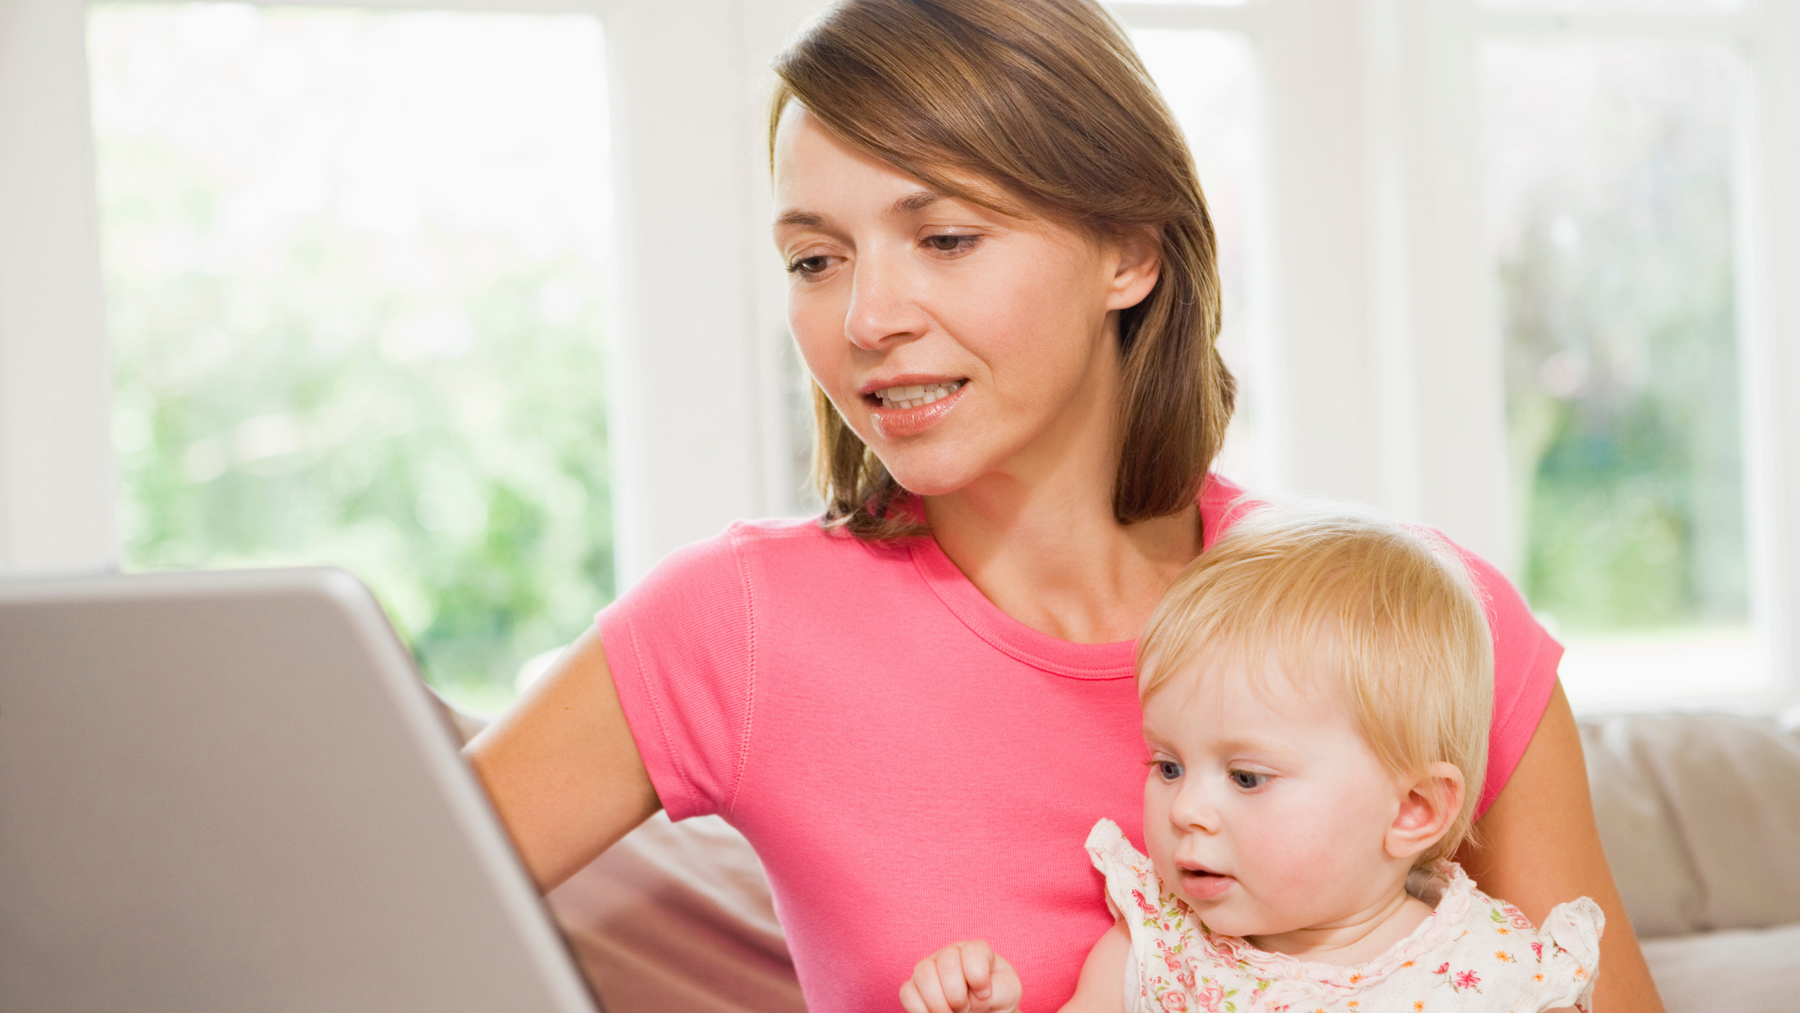 5 Home Security Tips For Single Mums